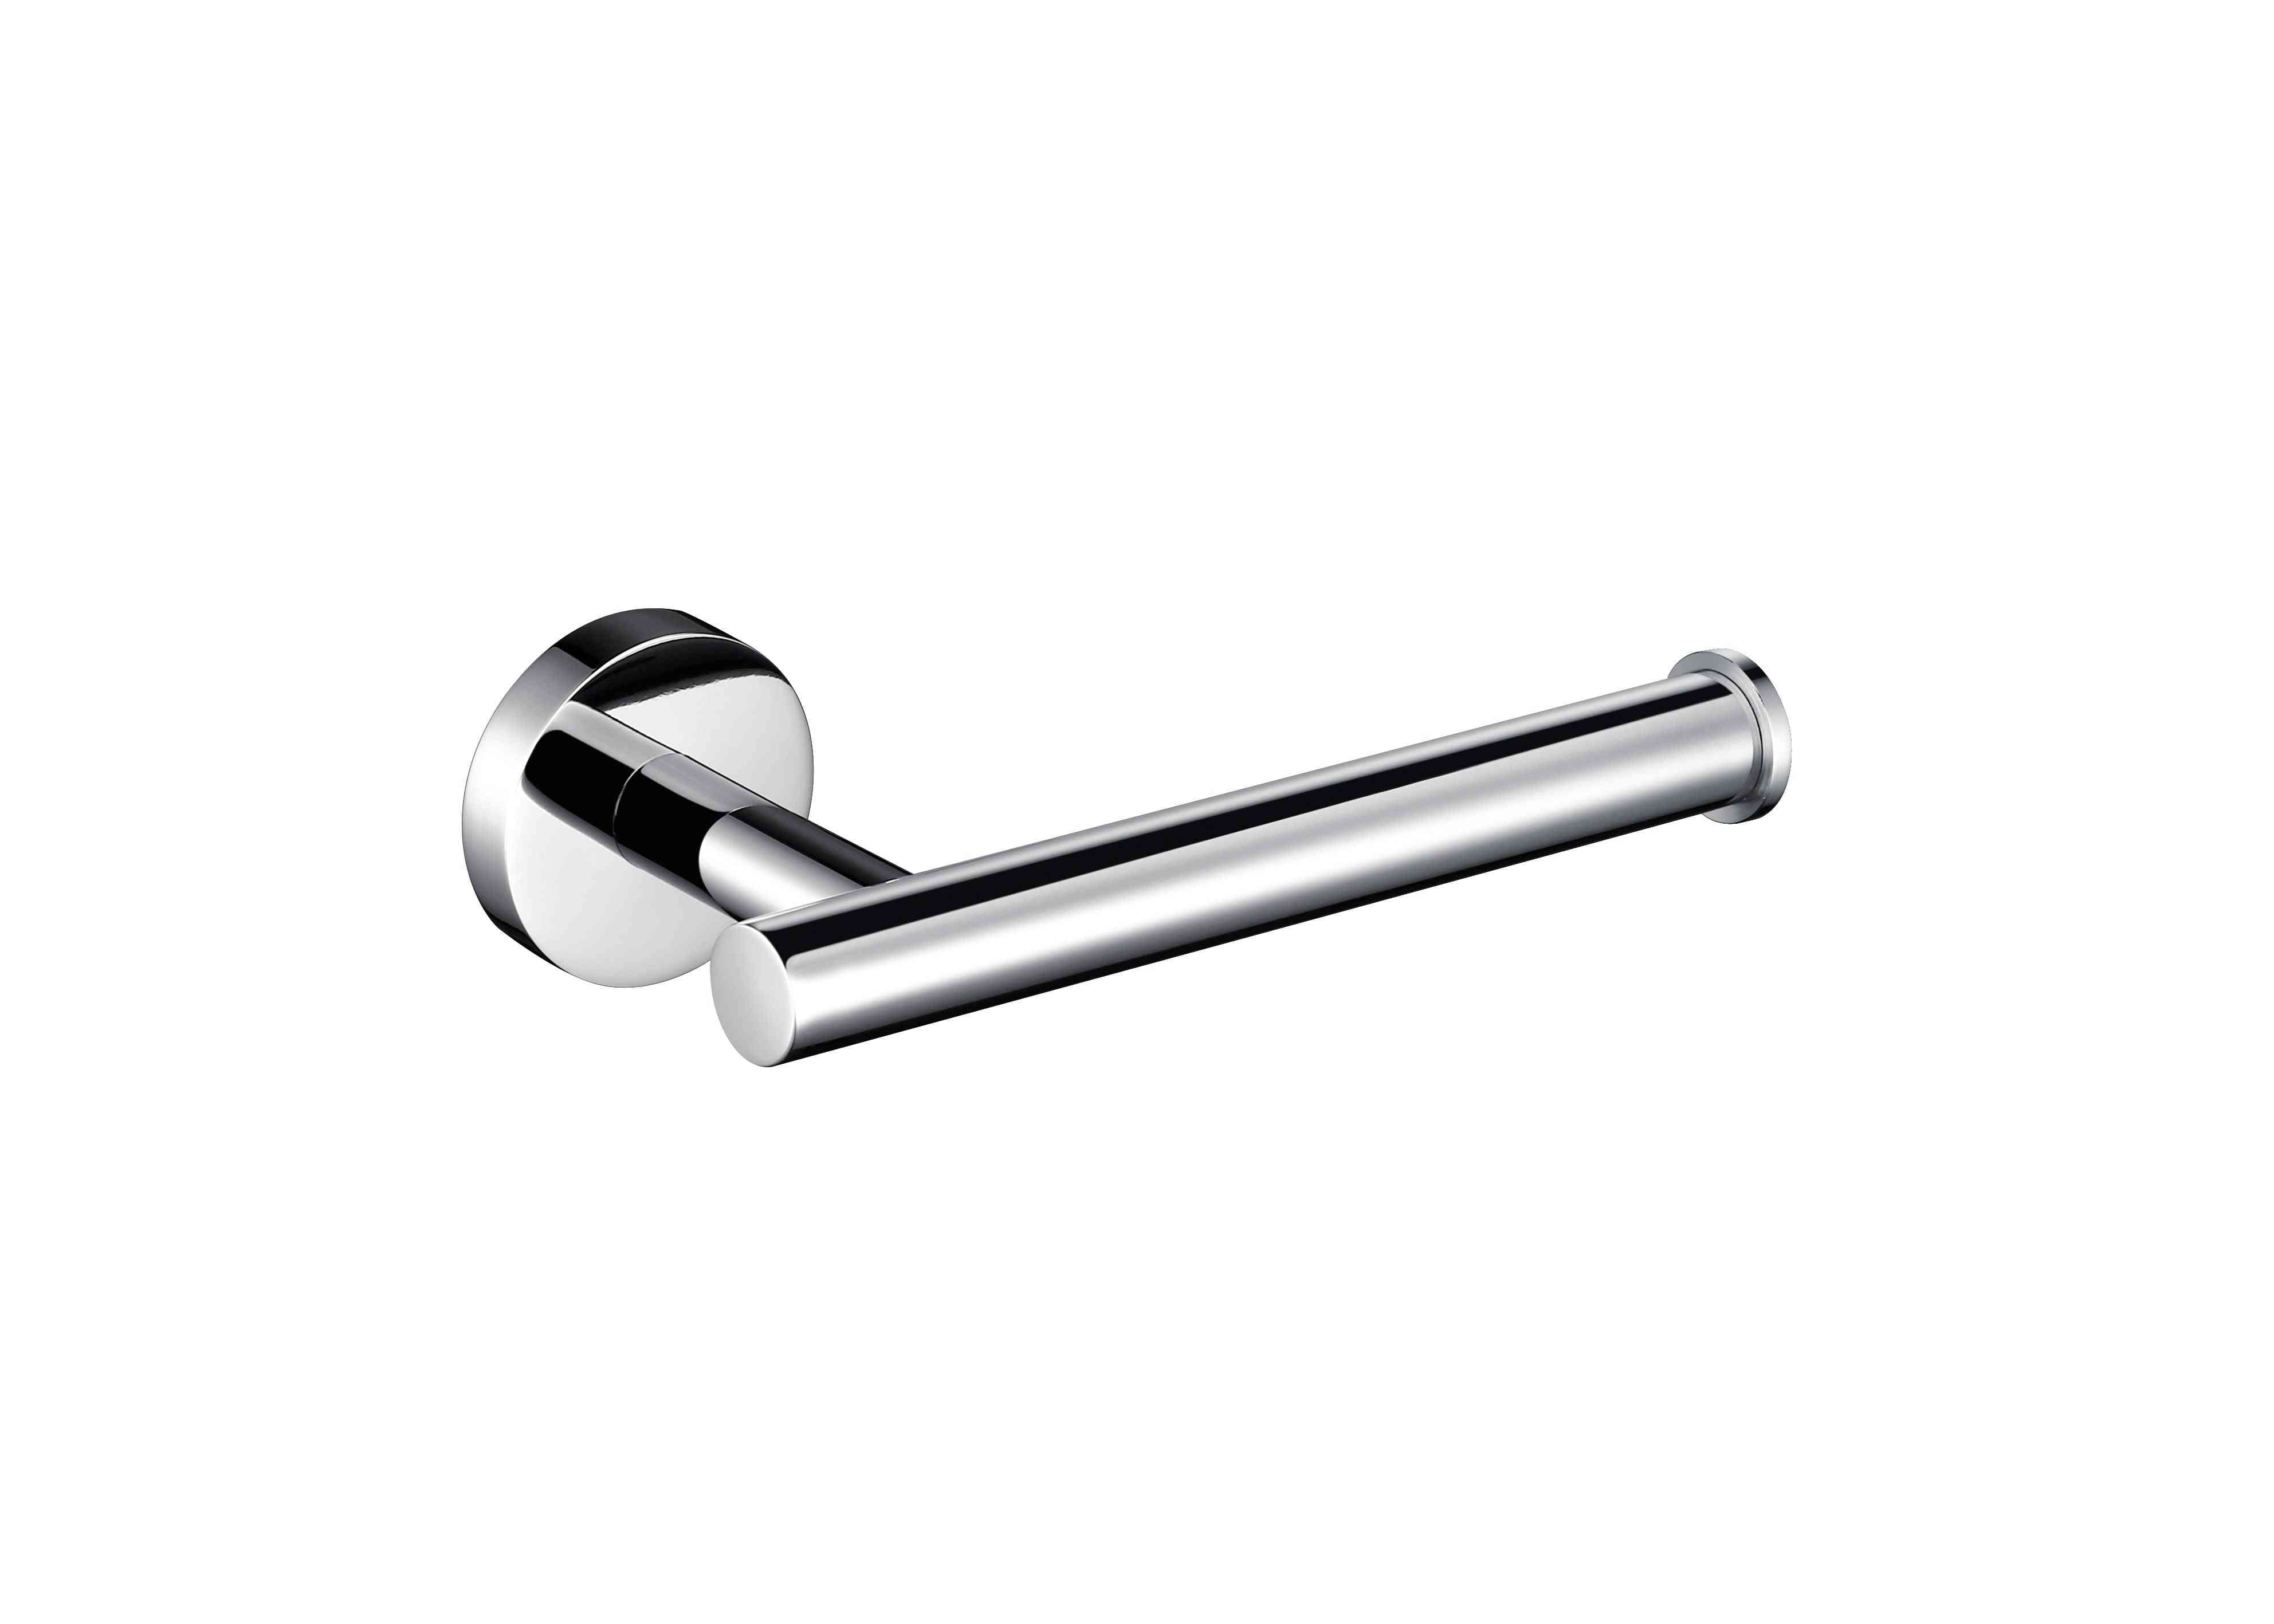 Chrome Stainless Steel, Round Wall Mounted Hand Towel Bar, Toilet Paper Holder